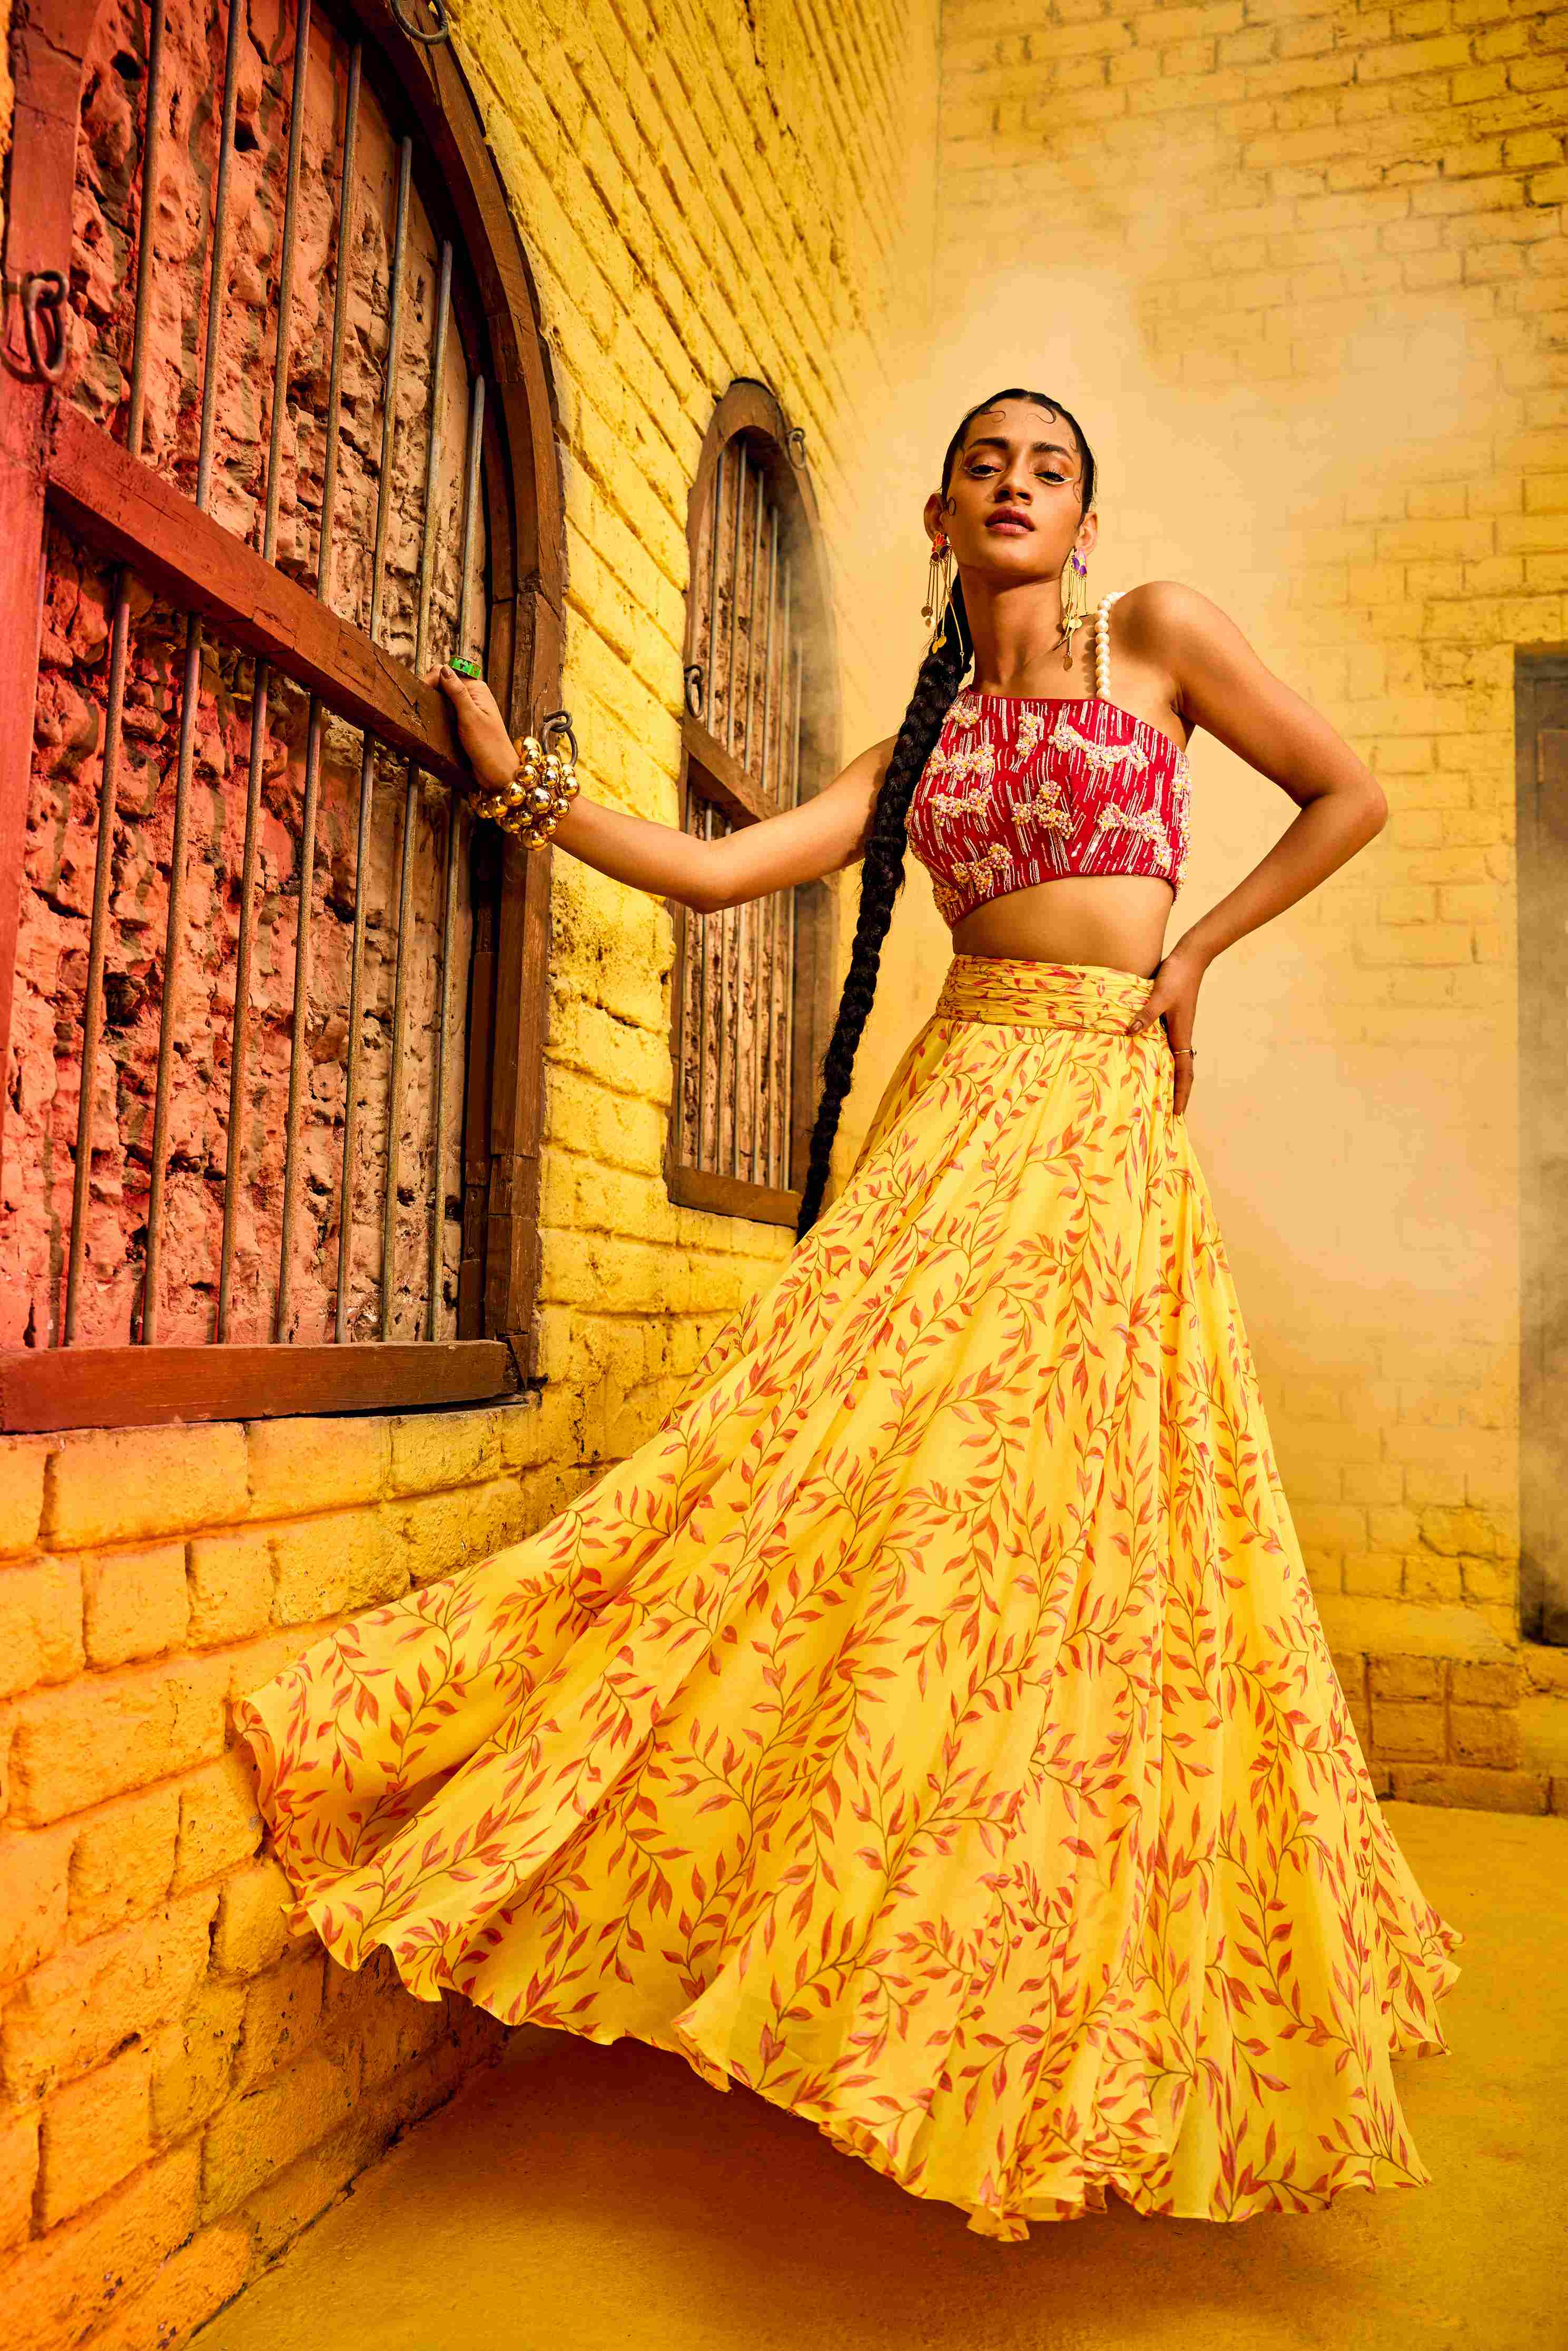 Dhivyadharshini is all dolled up in a vibrant yellow lehenga by designer  Suresh Menon and she looks sizzling! – South India Fashion